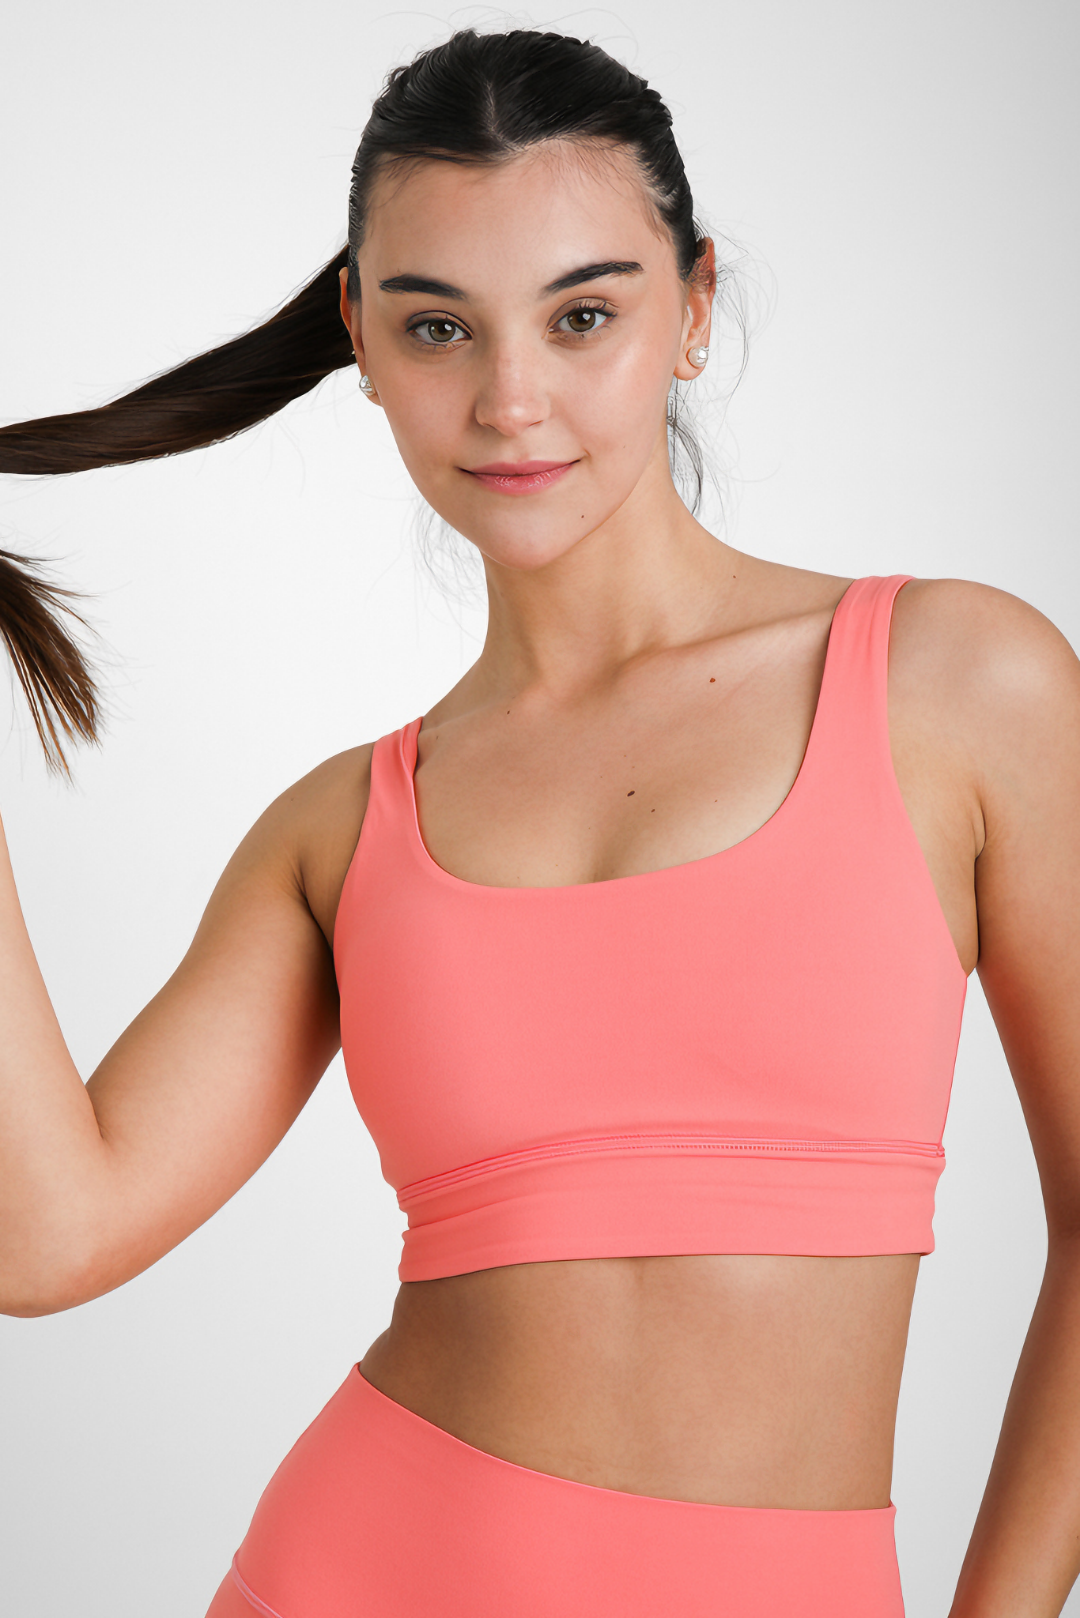 Premium Yoga & Pilates Bras for Comfort and Support